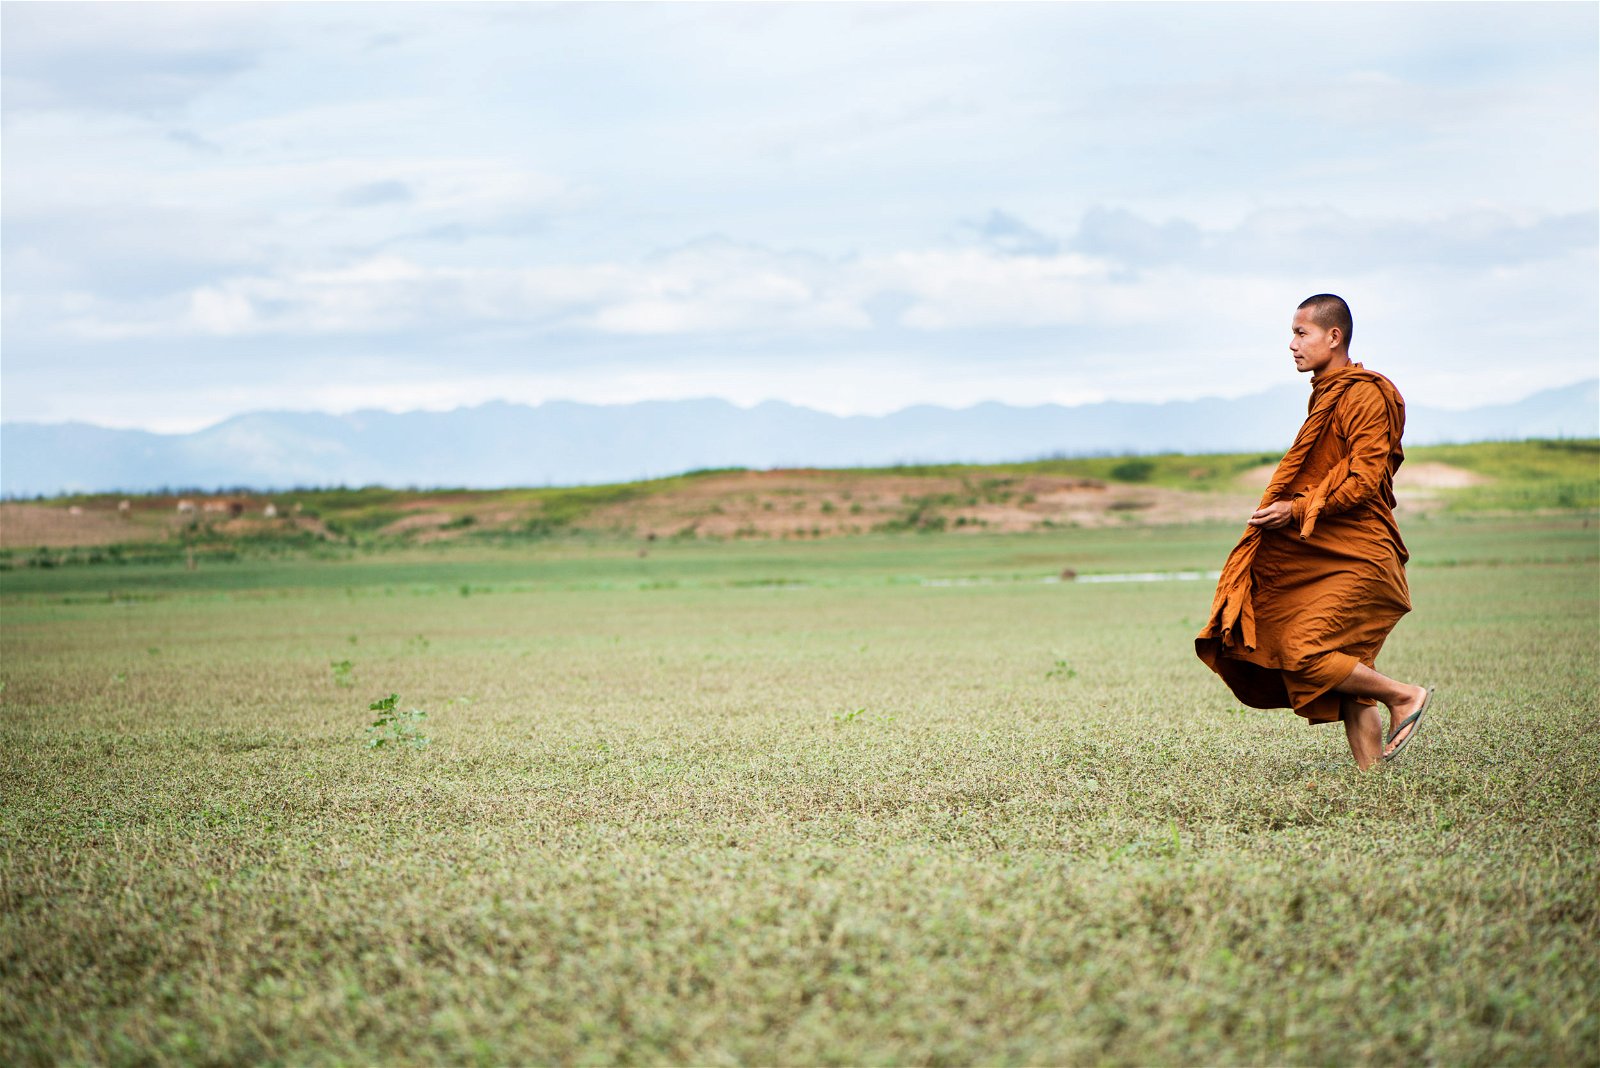 Buddhist monk in a field illustrating negative space photography example.